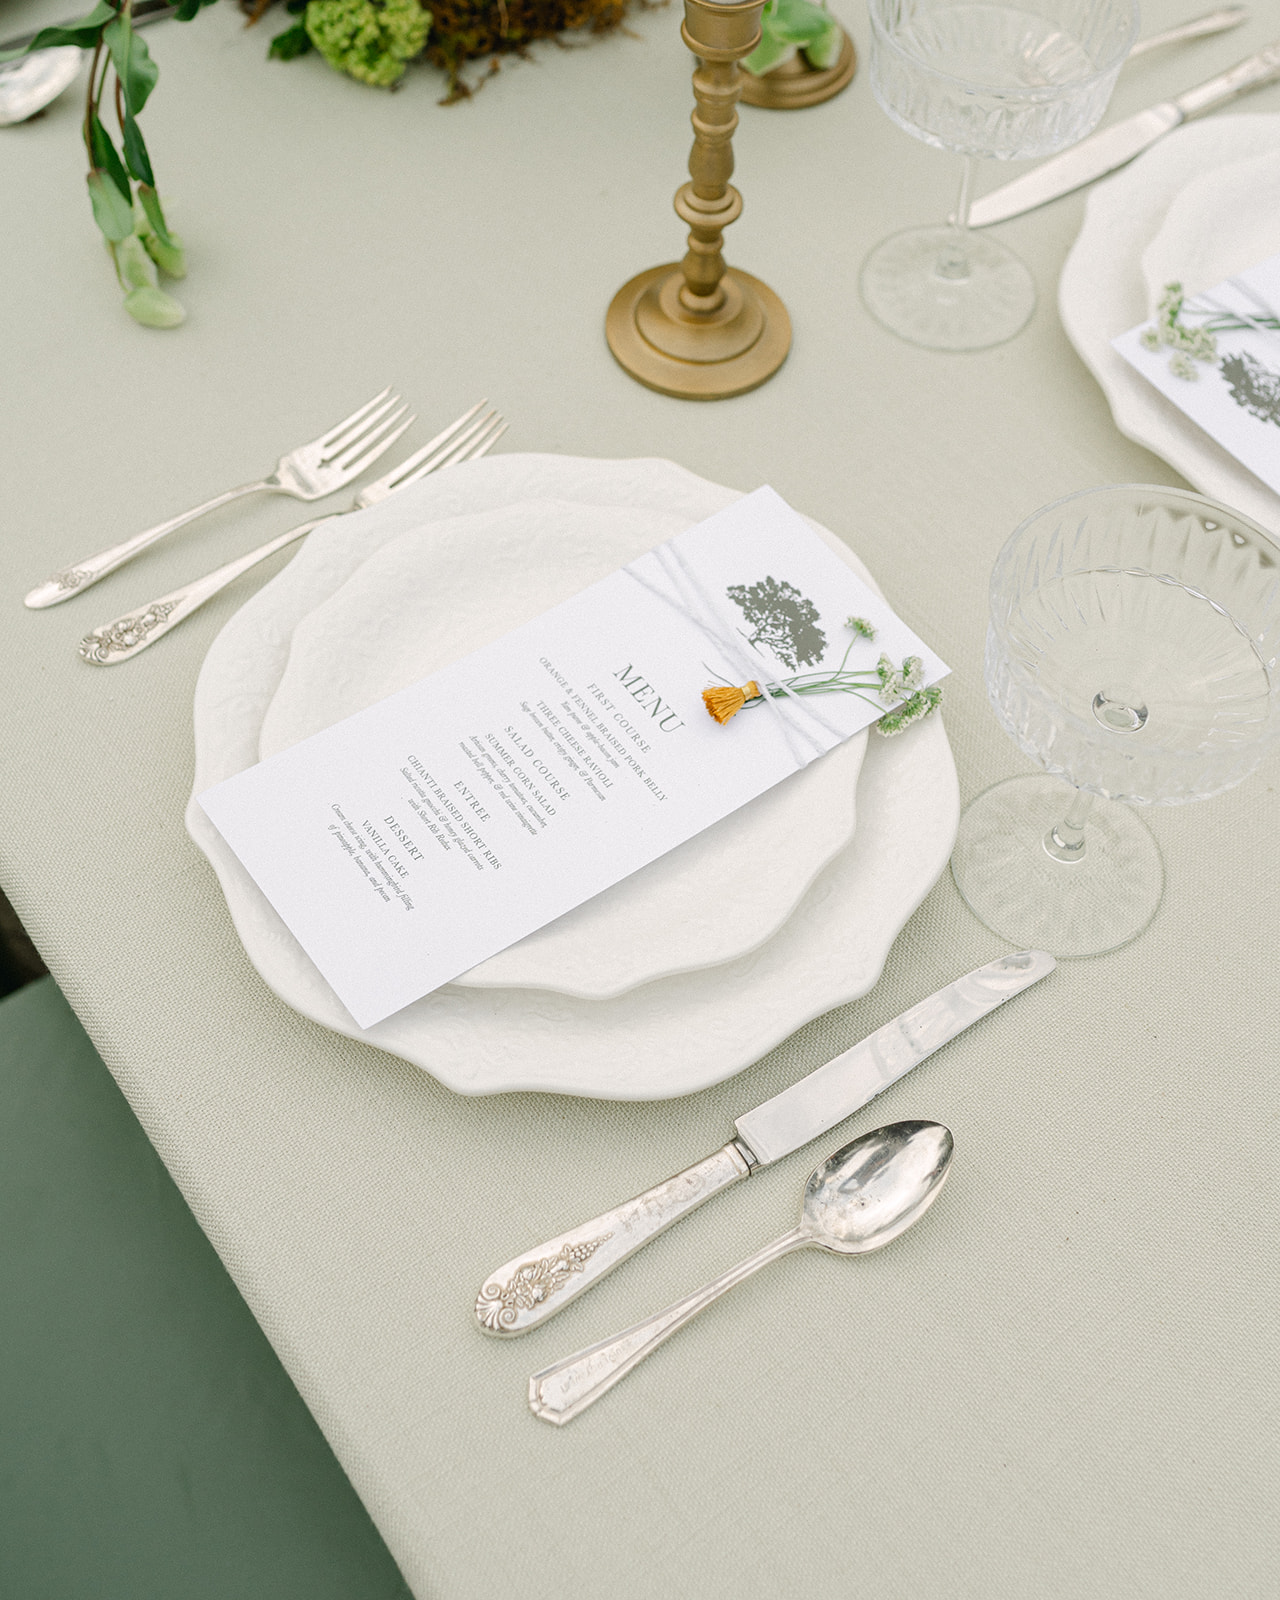 Simple and modern wedding table place setting.